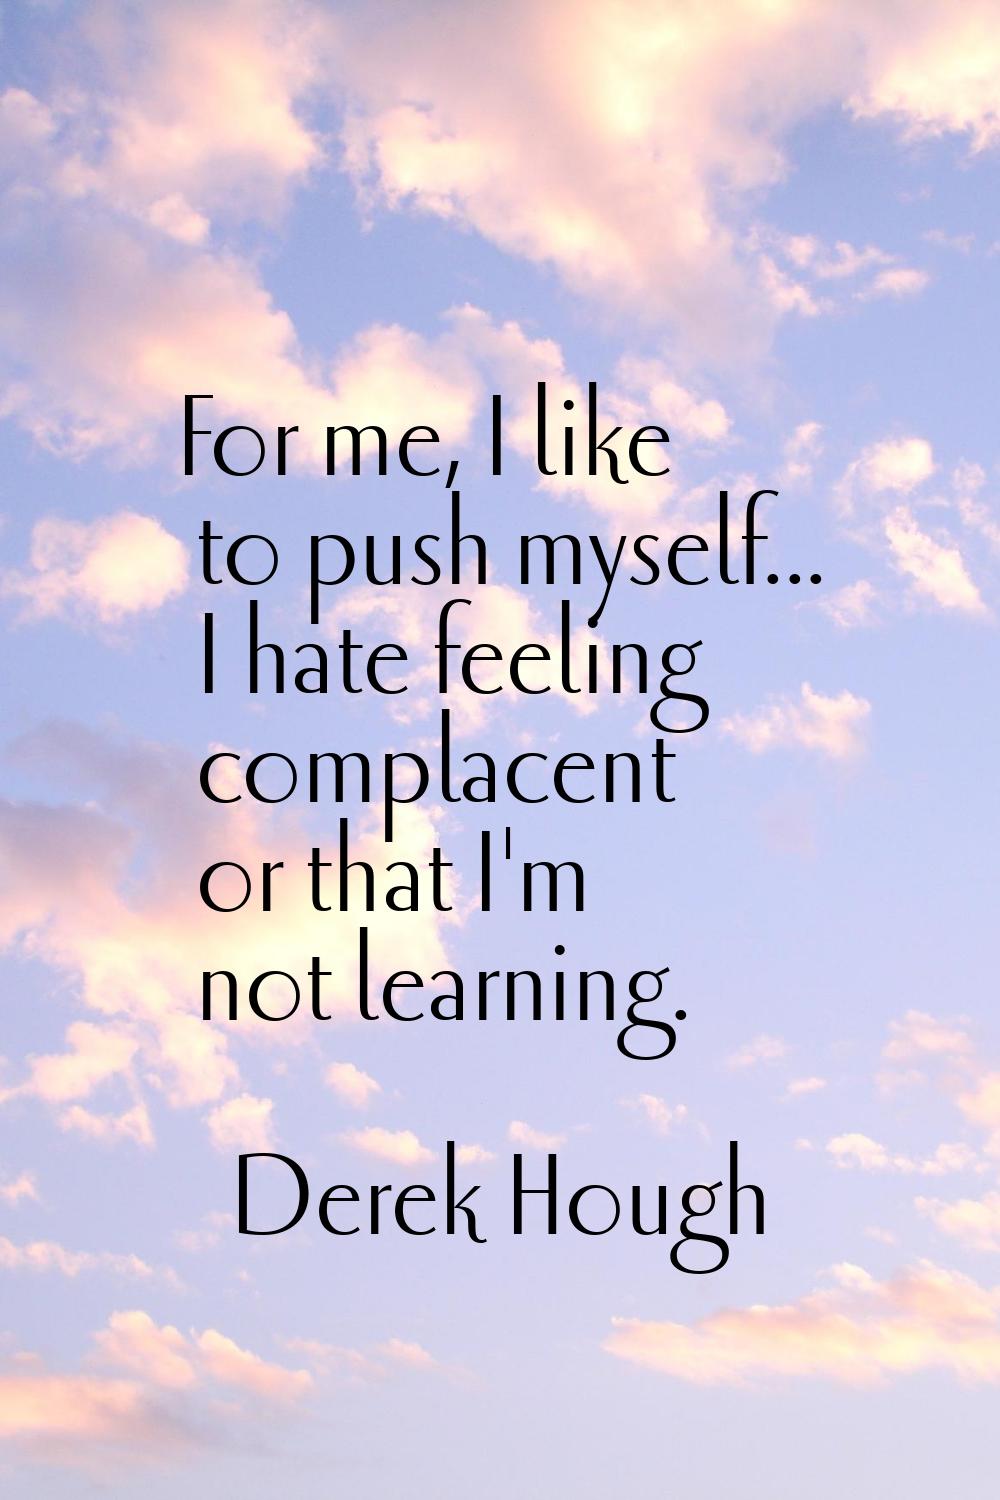 For me, I like to push myself... I hate feeling complacent or that I'm not learning.